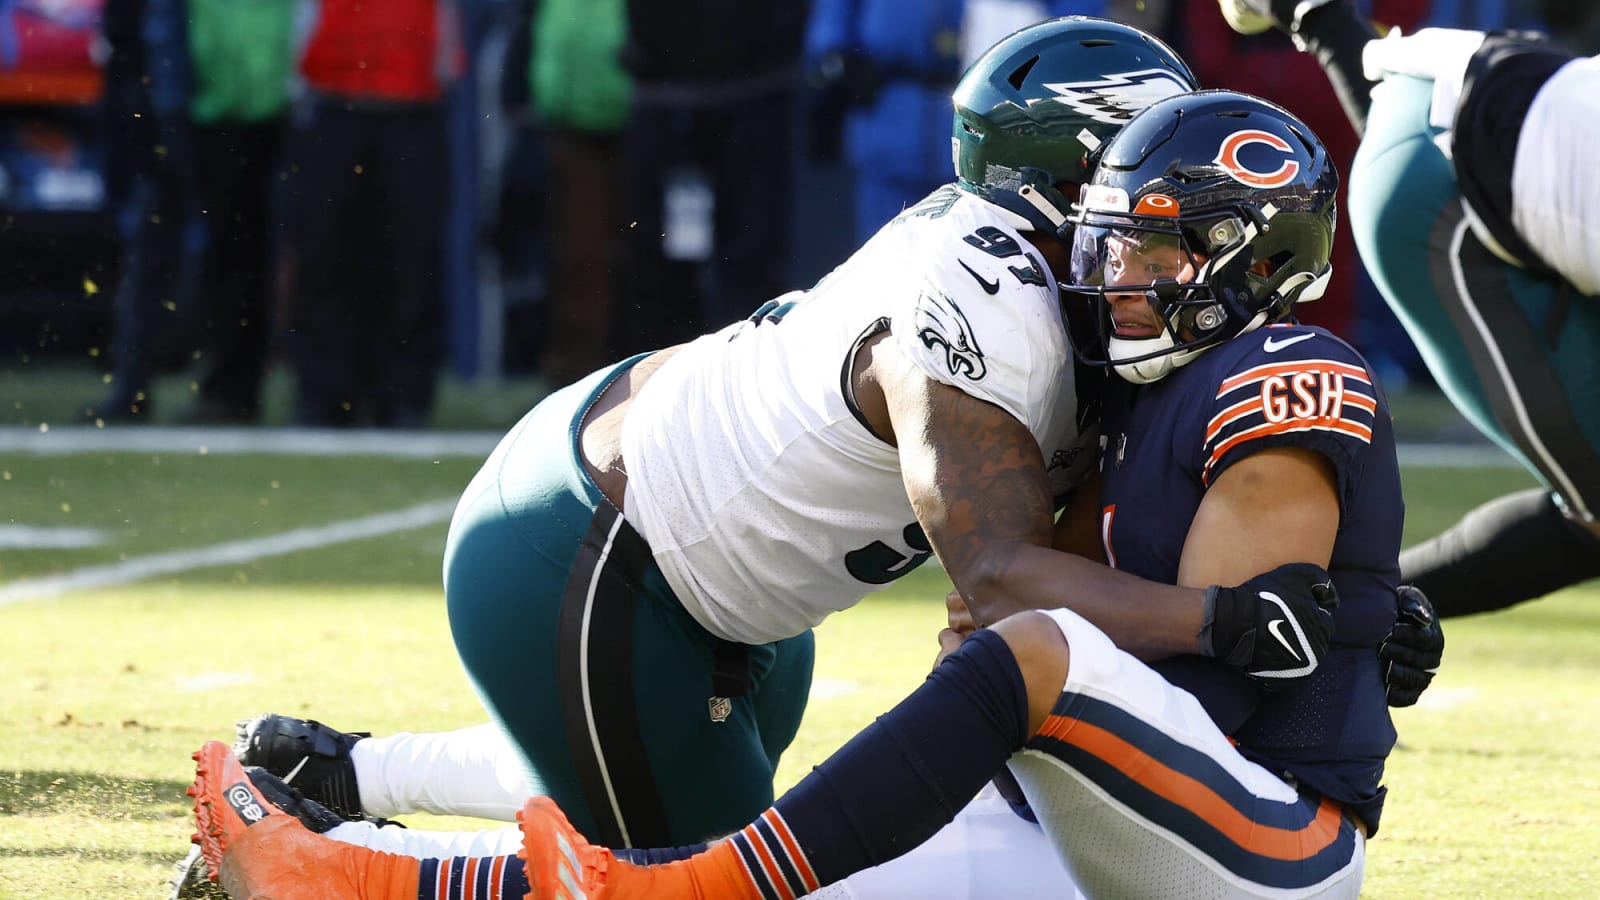 Chicago Bears should look to sign both of the top defensive tackles in free agency